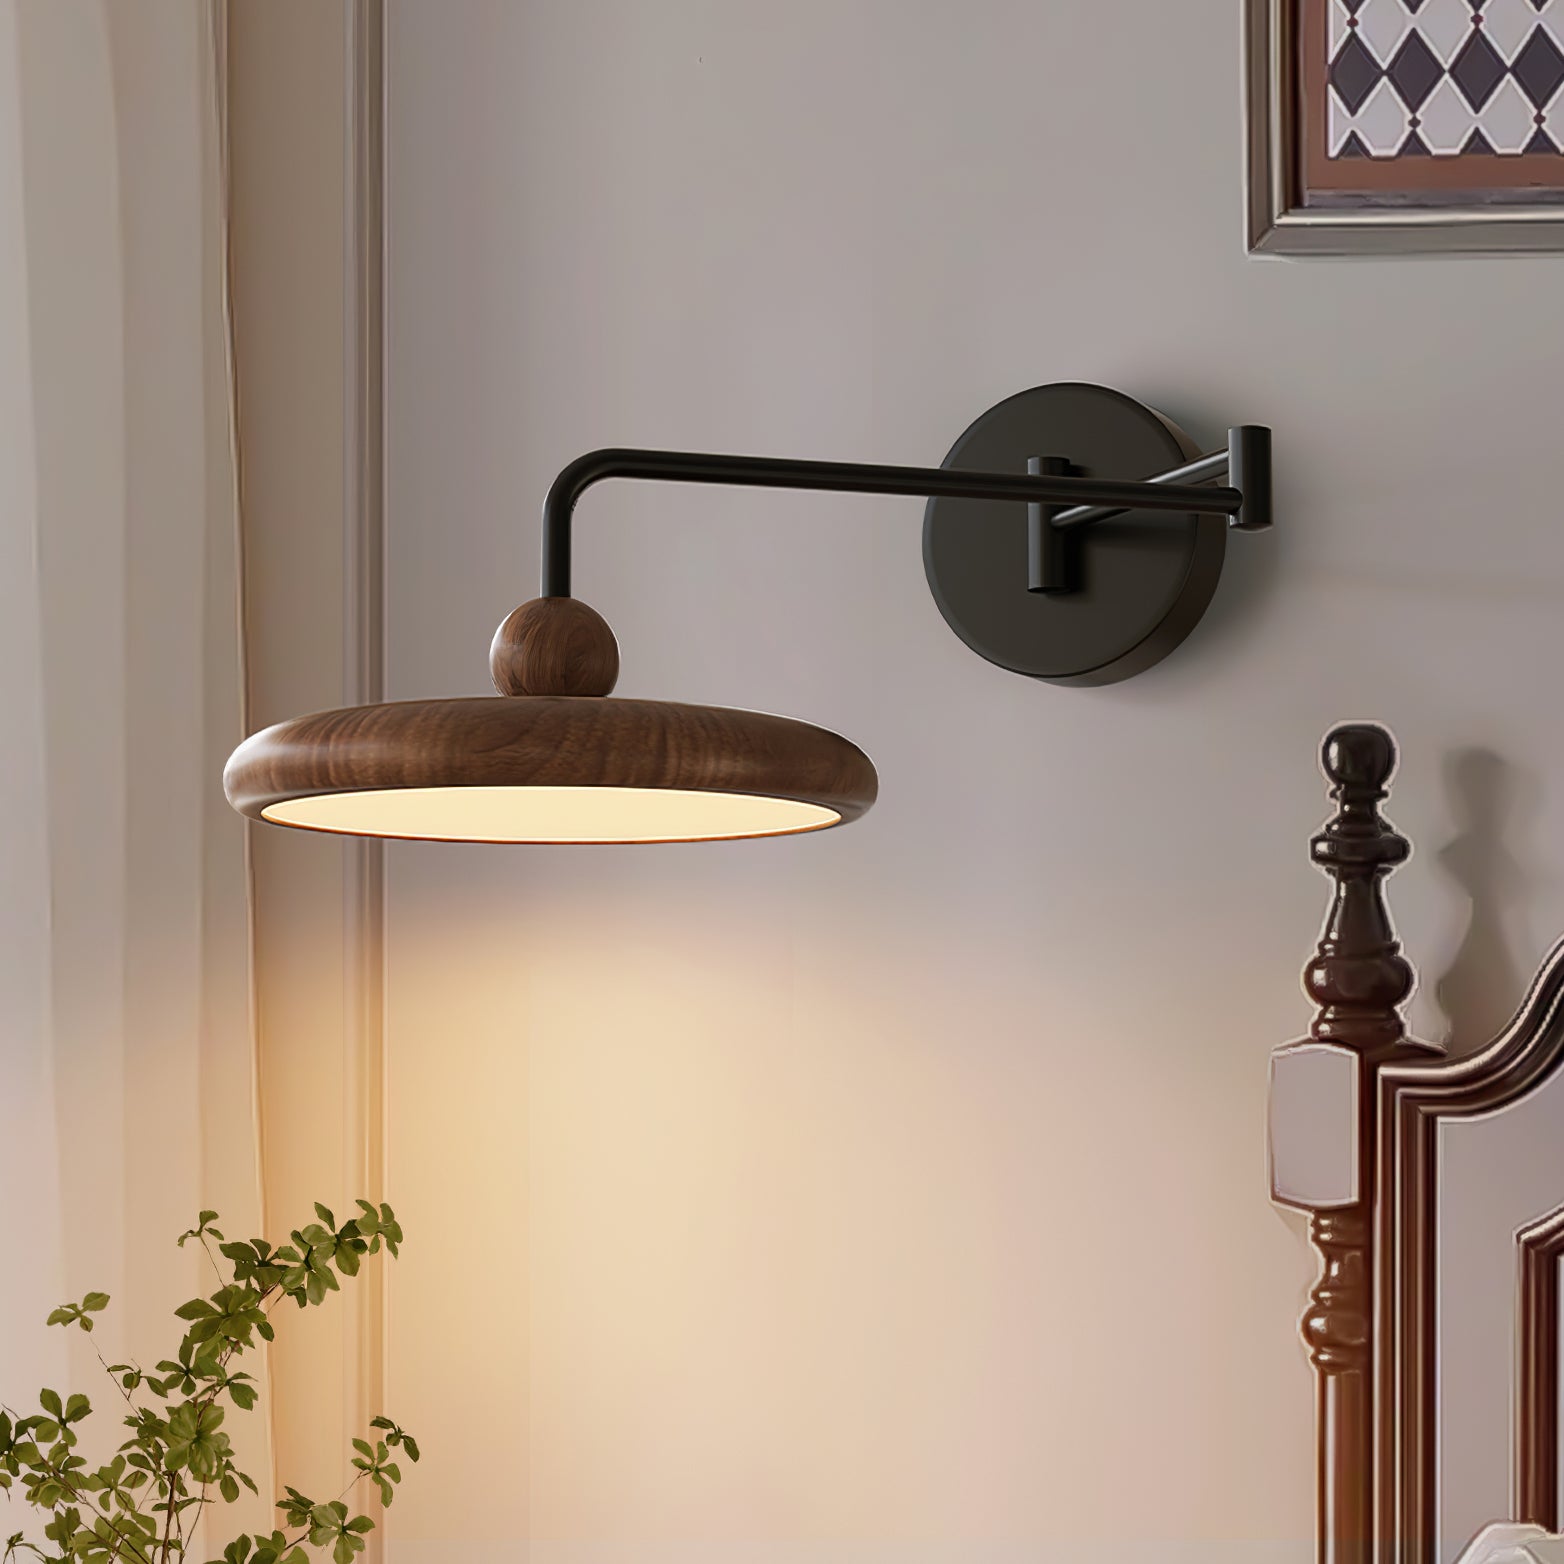 Illuminate Your Home with Style: The Benefits of Swing Arm Wall Lamps